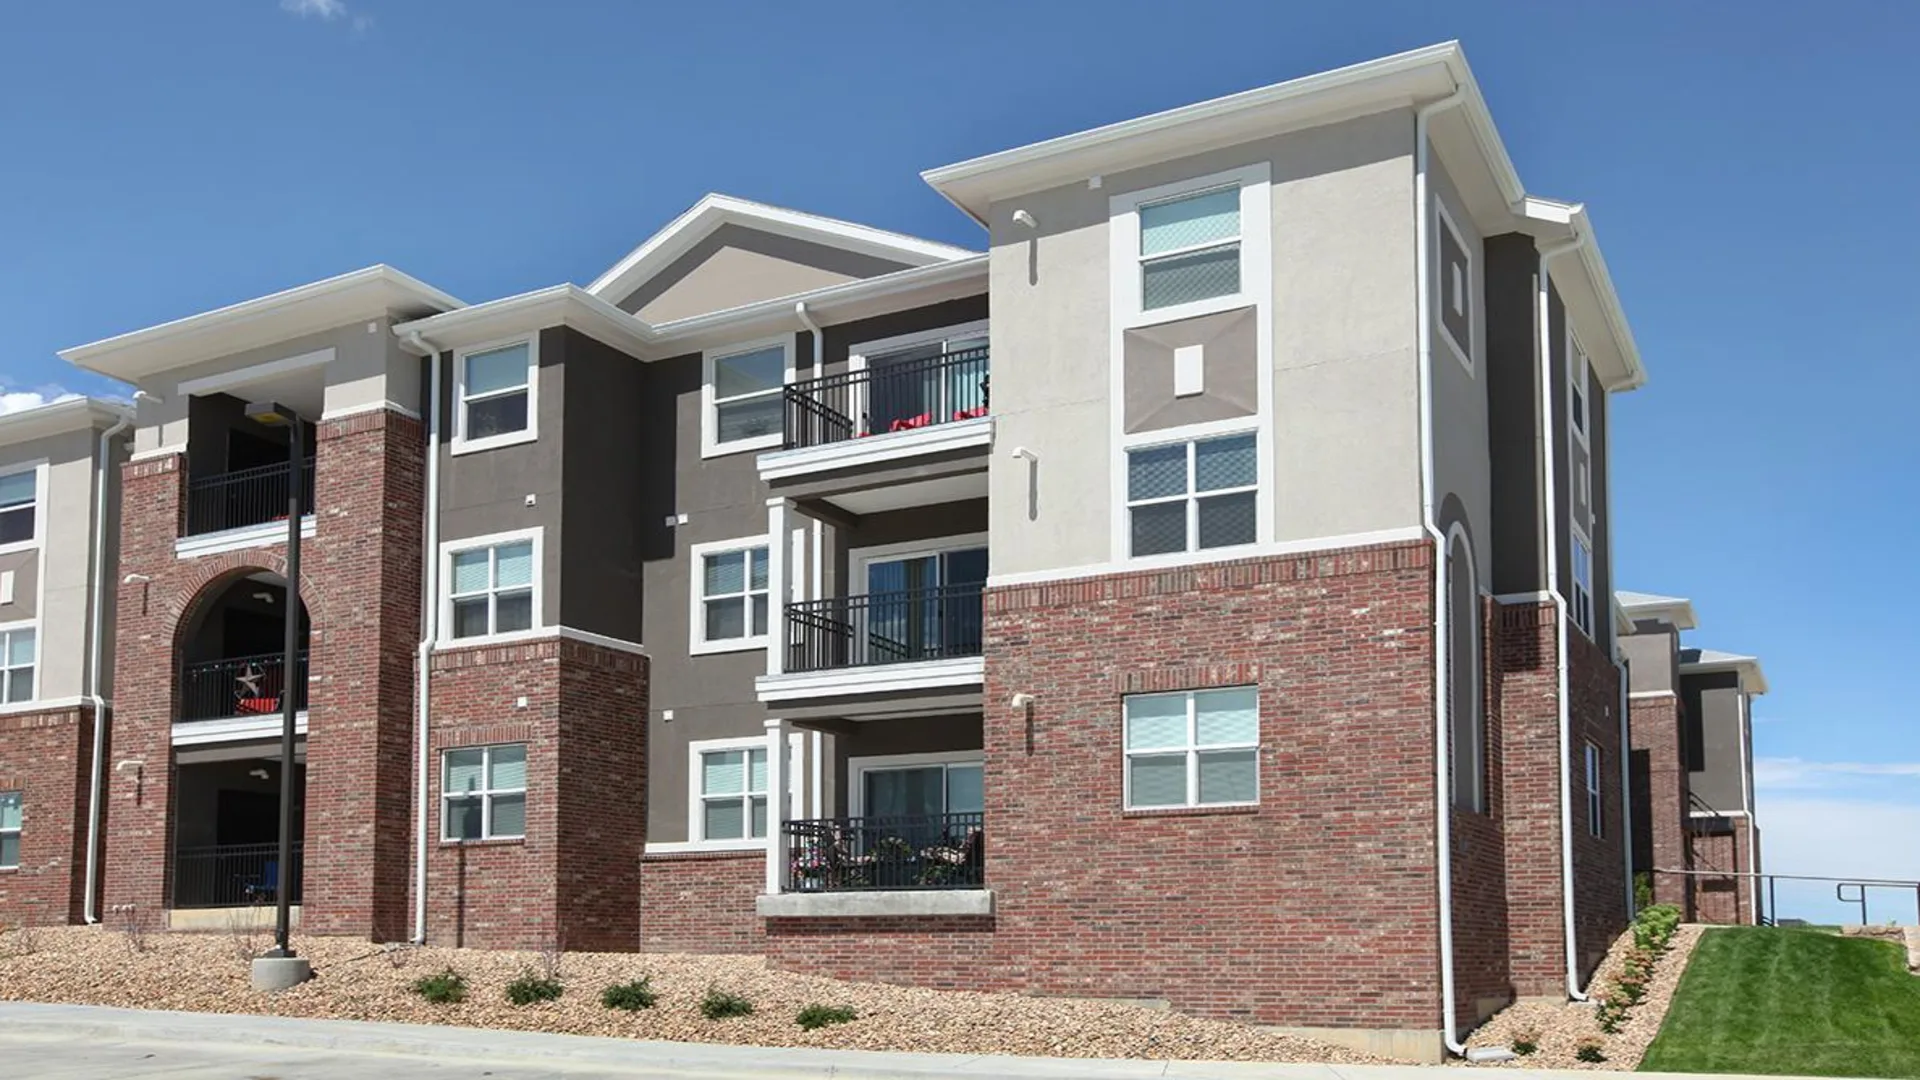 the apartment complex is located in a residential area at The Outlook Ridge Apartments